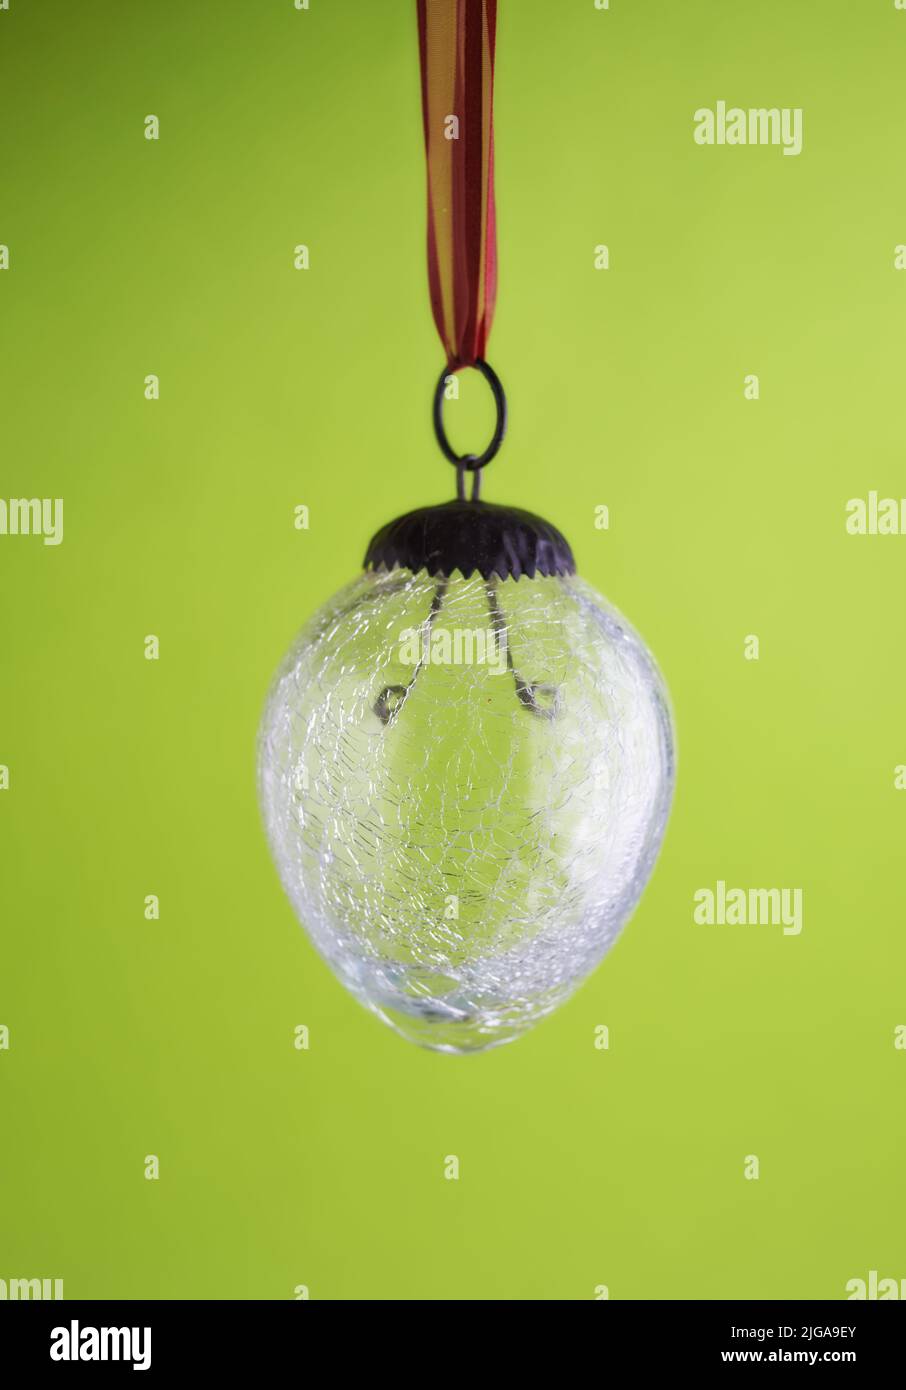 Closeup of a glass lightbulb against a green copyspace background. Zoom in on lightbulb details with no electricity to power, energy crisis, turned Stock Photo